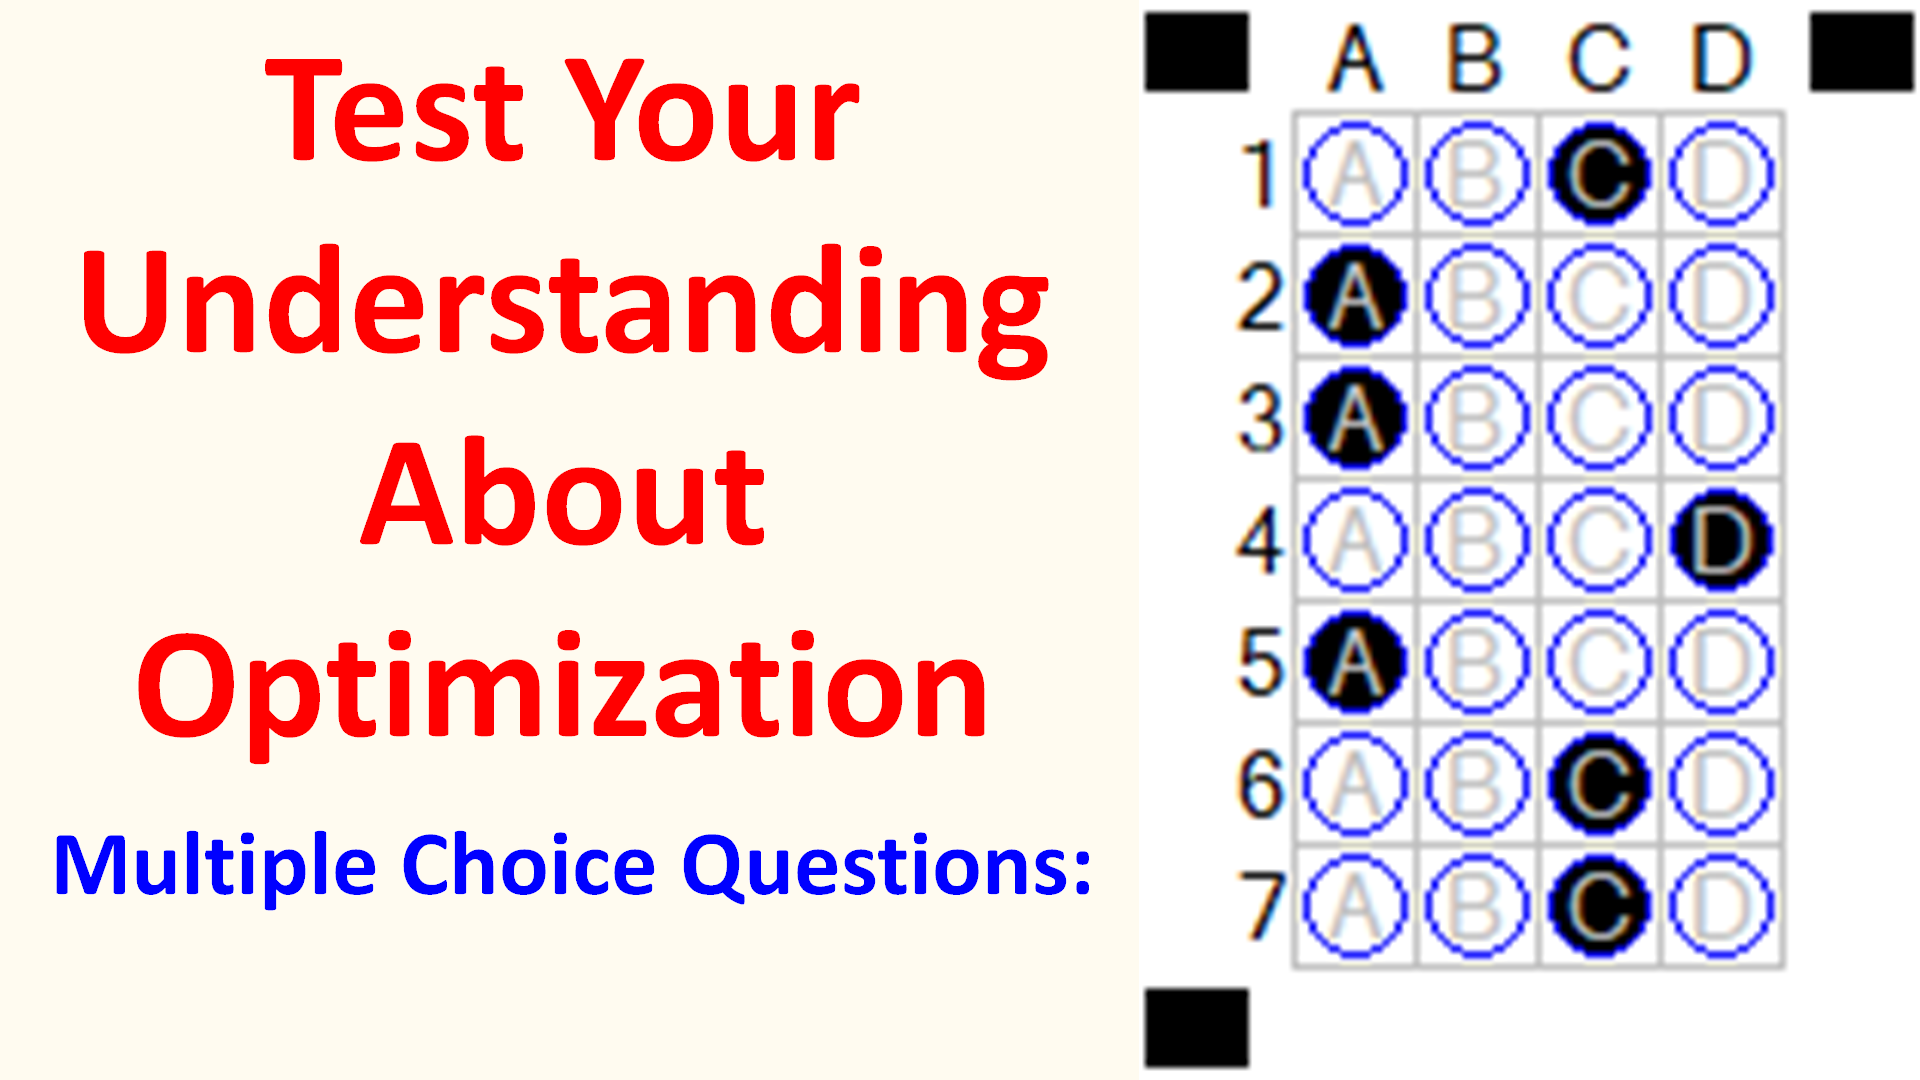 Test Your Understanding About Optimization